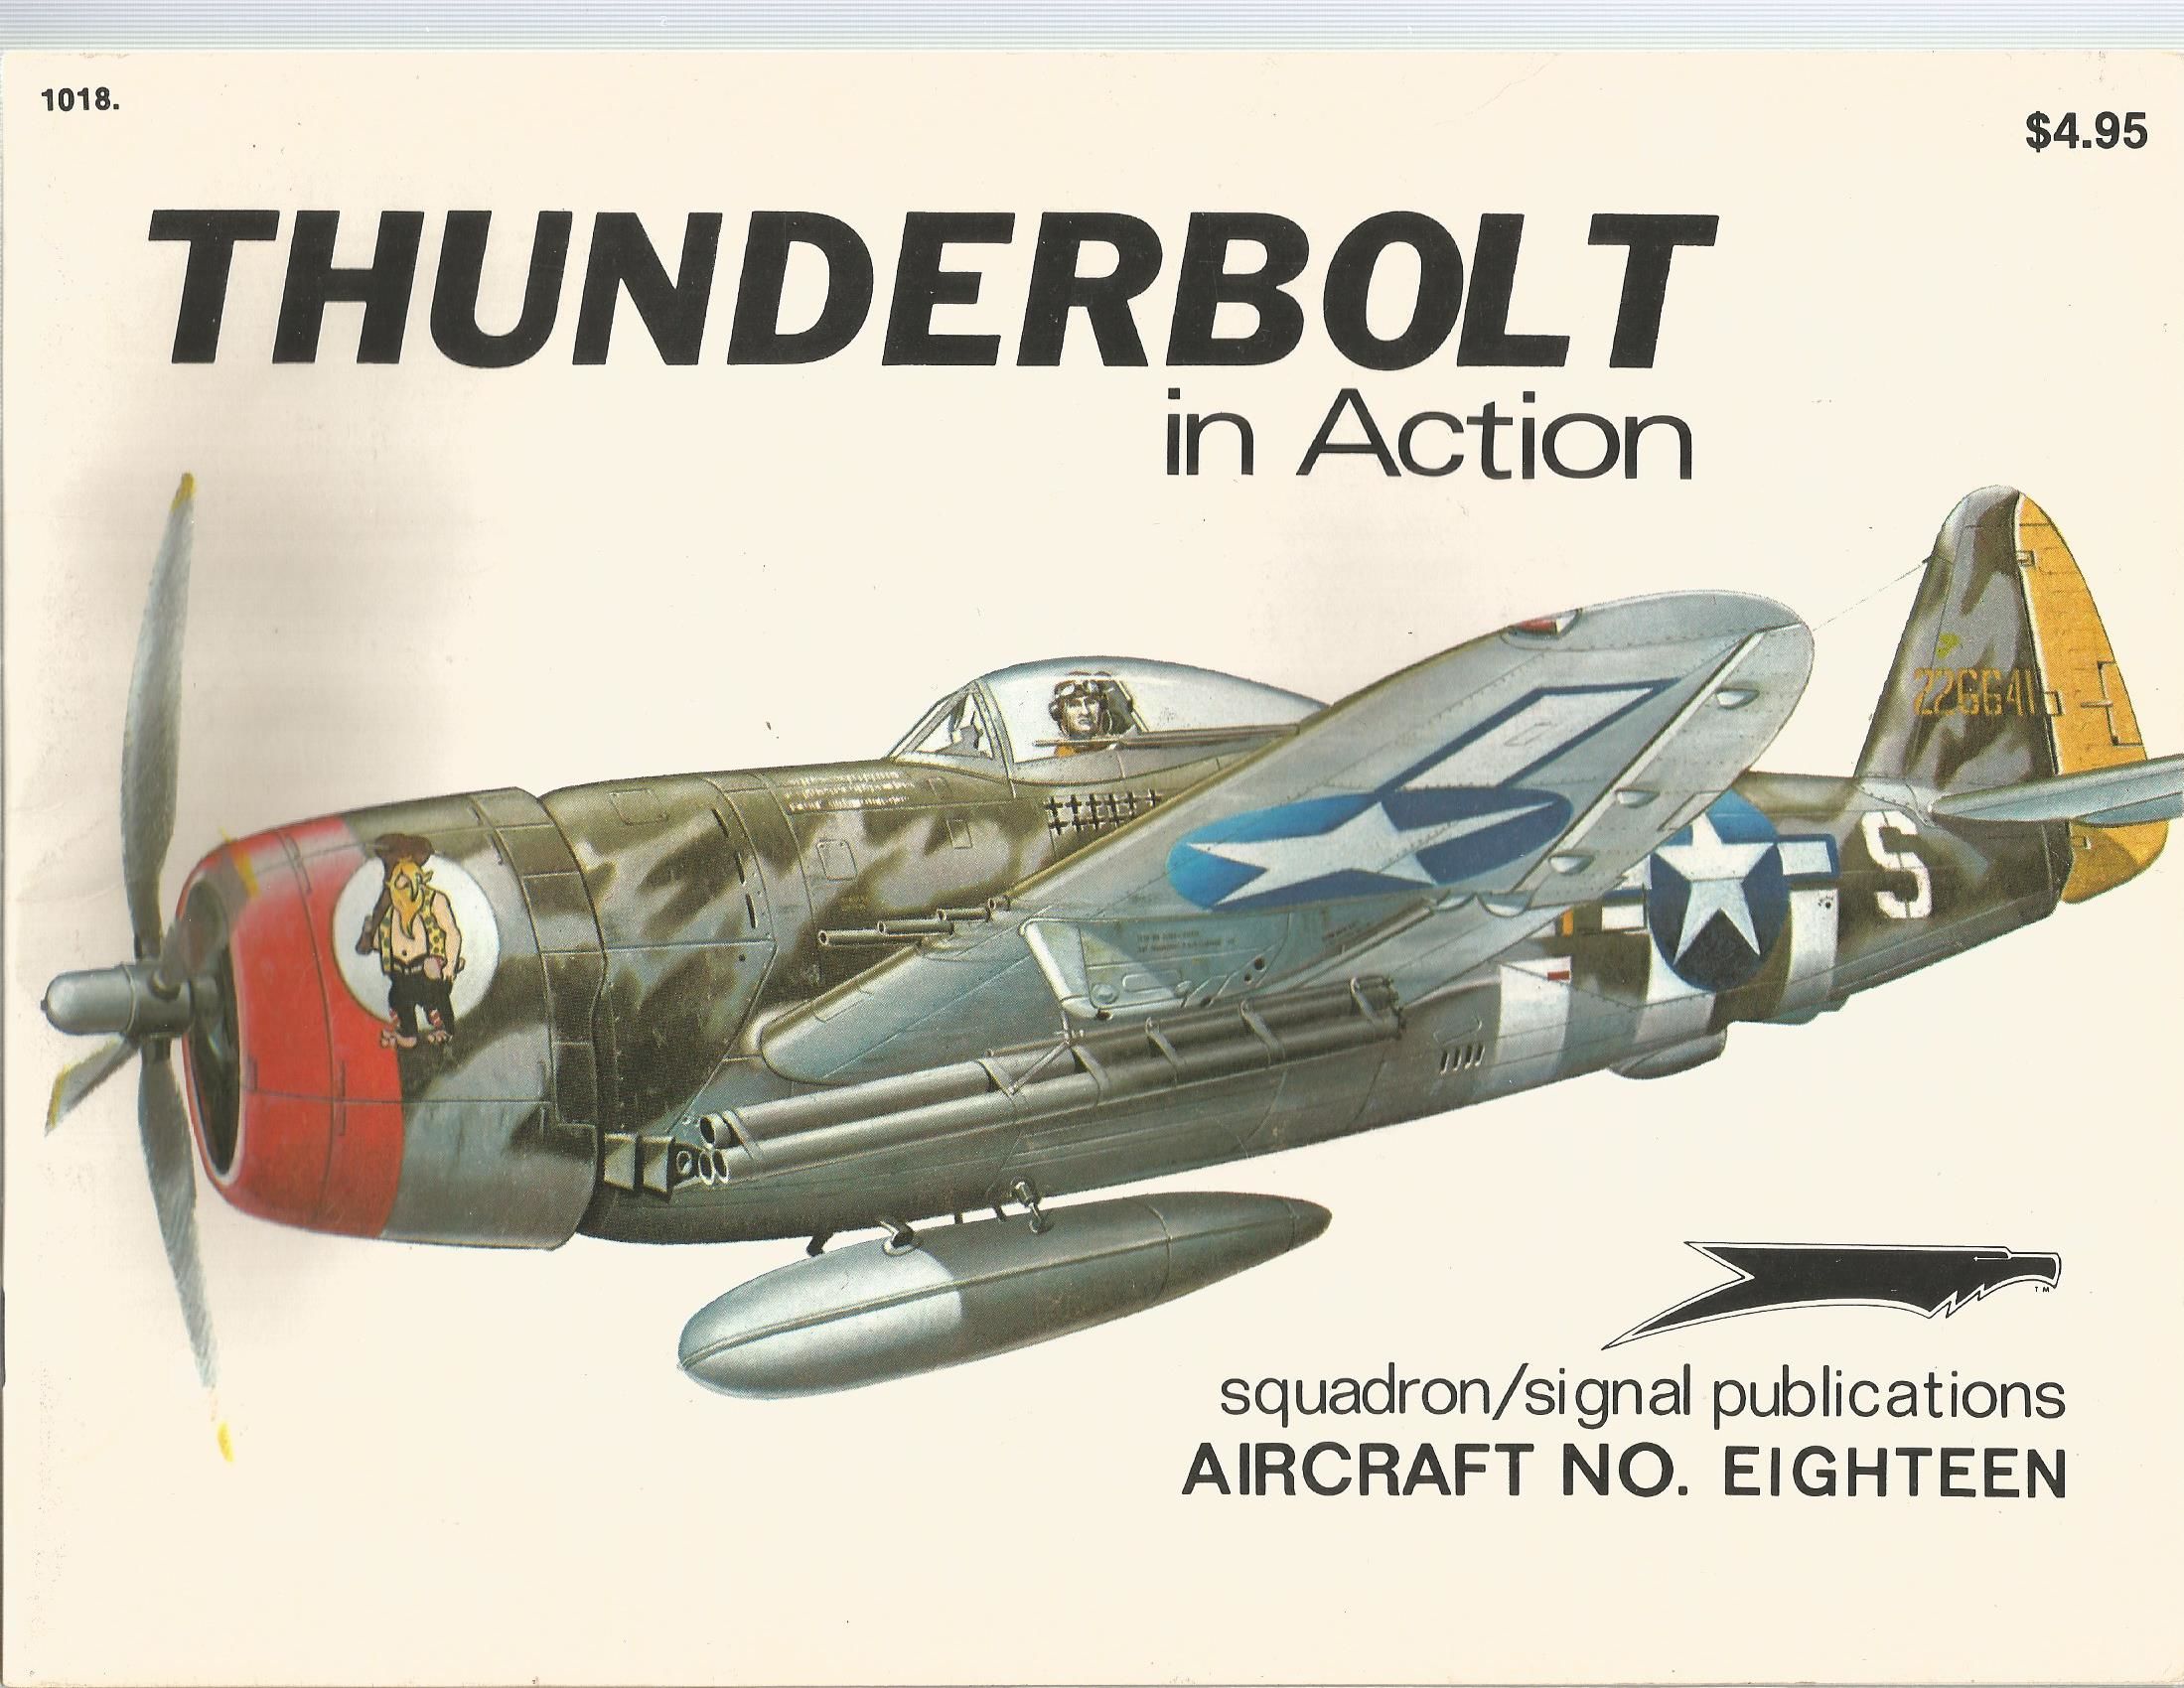 Thunderbolt in action